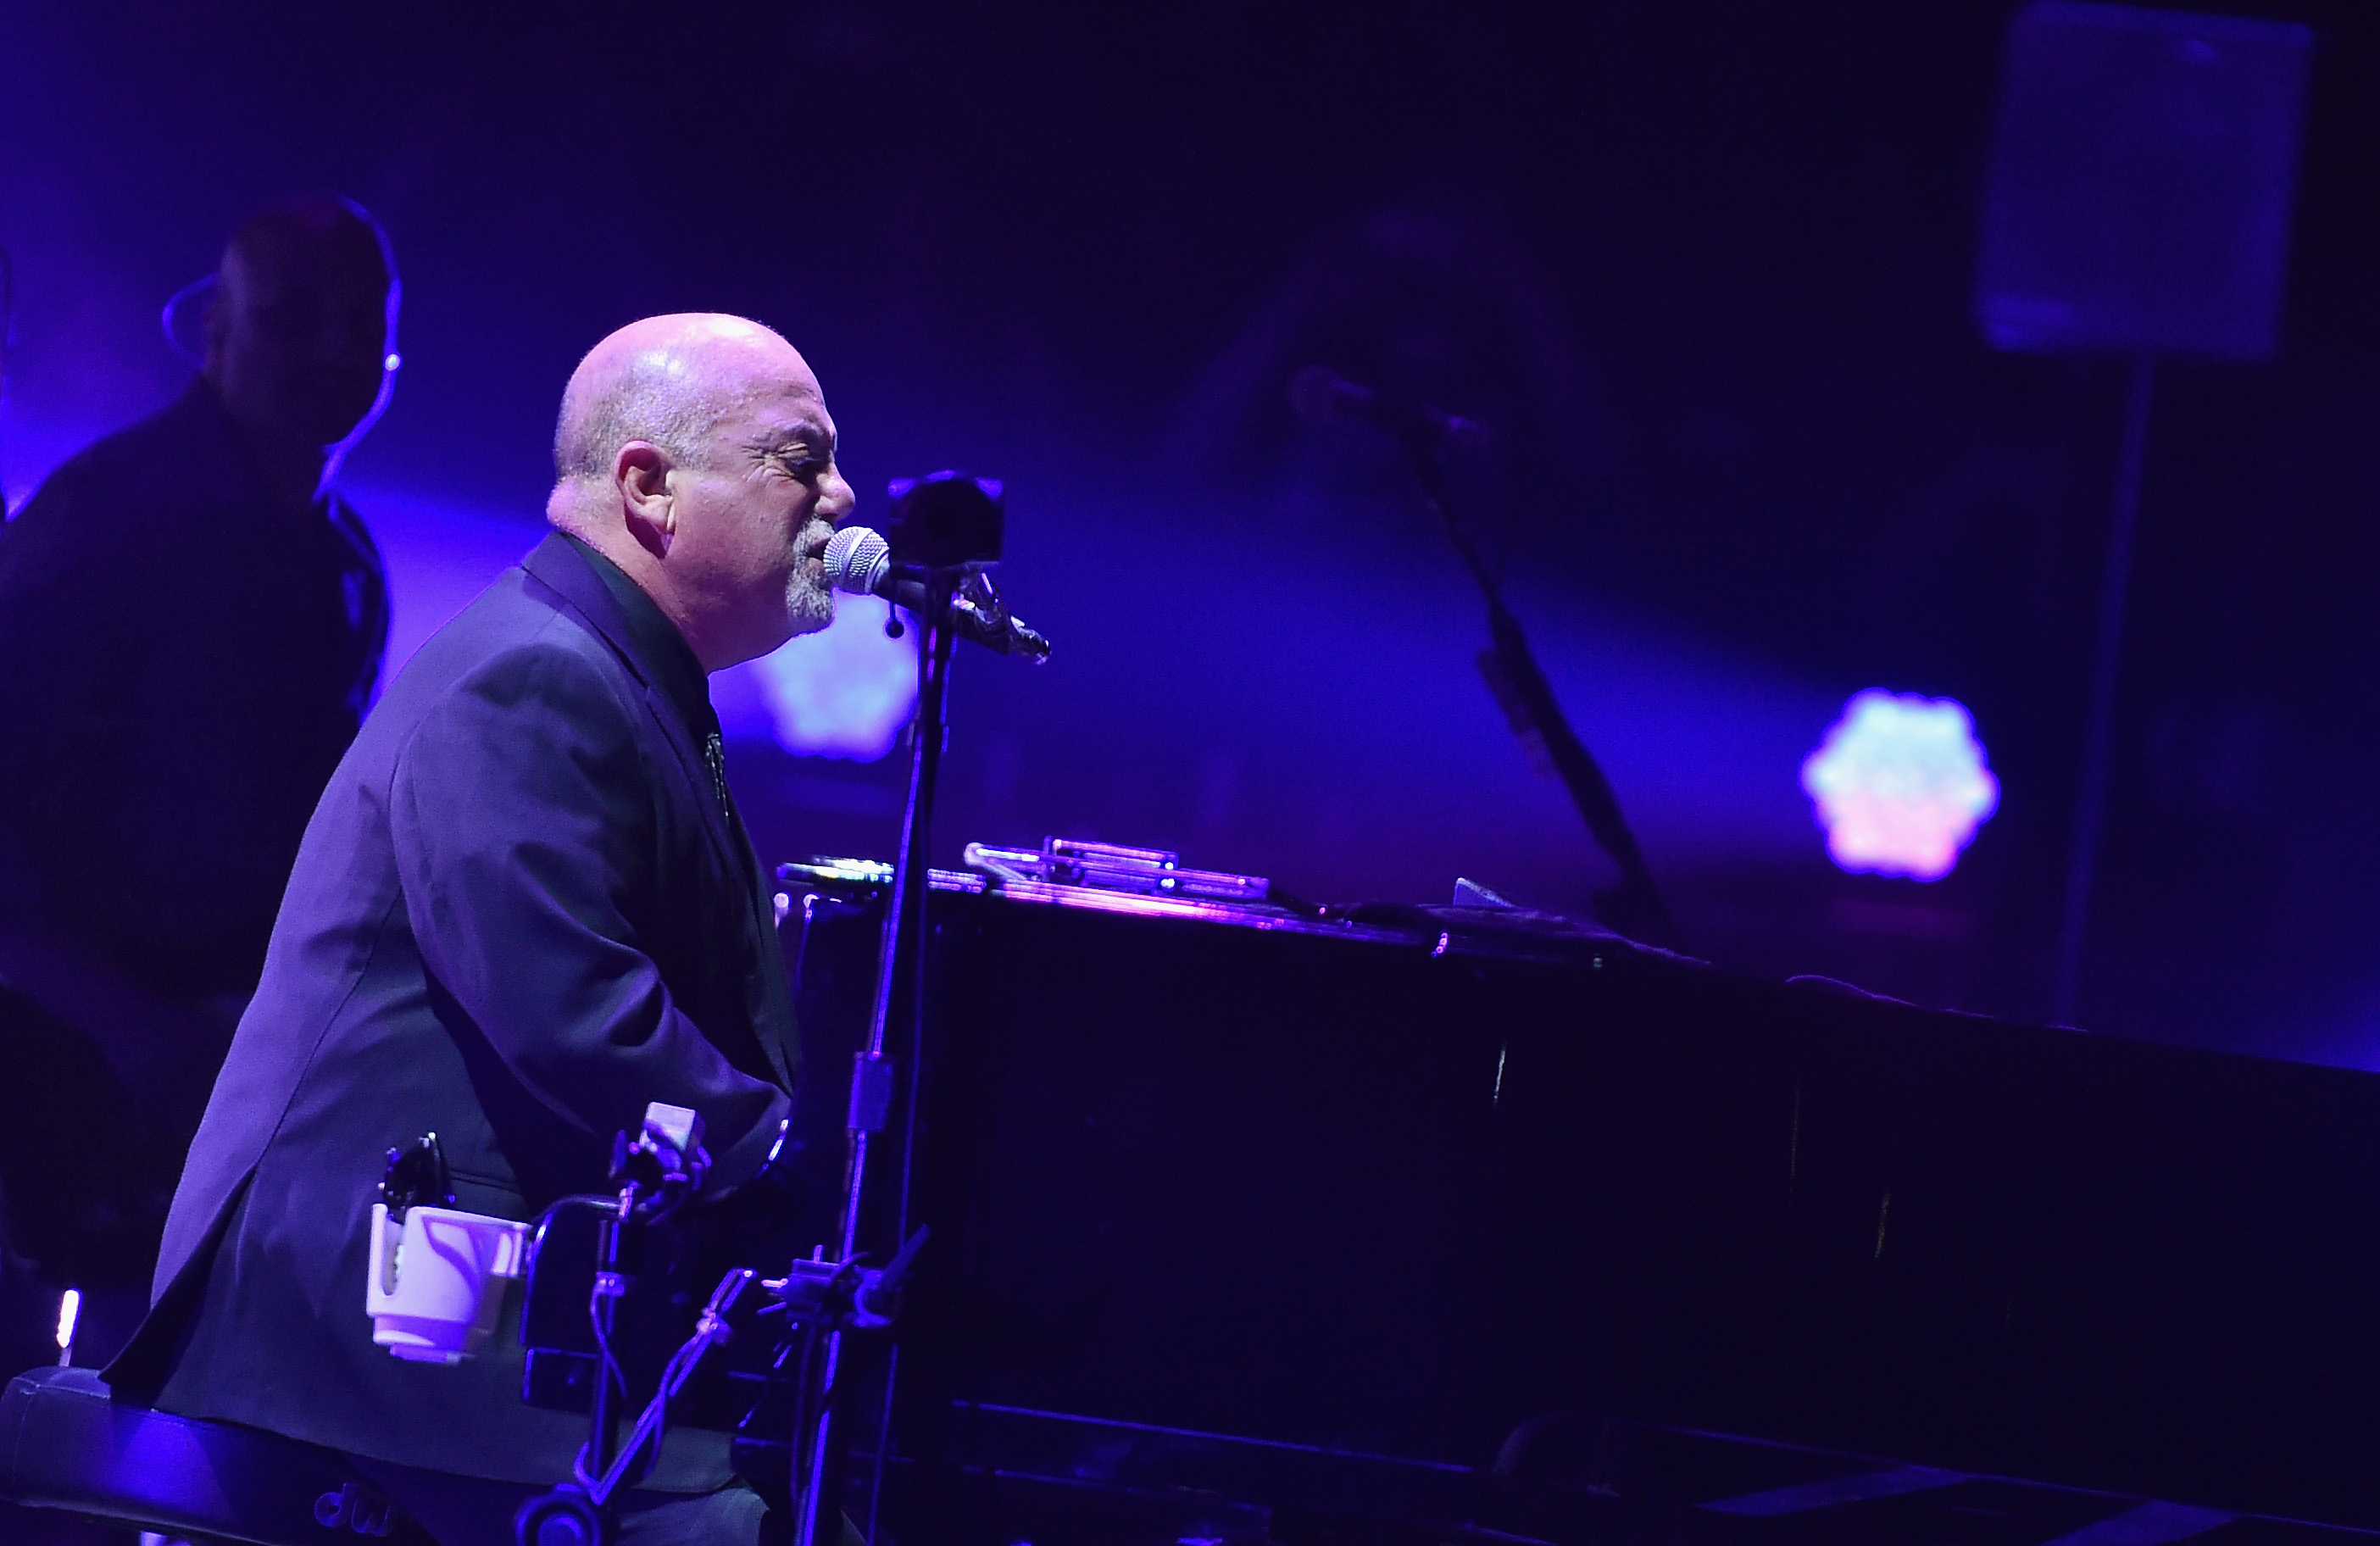 Billy Joel performs in concert at Madison Square Garden on May 27 in New York City. (Mike Coppola/Getty Images)